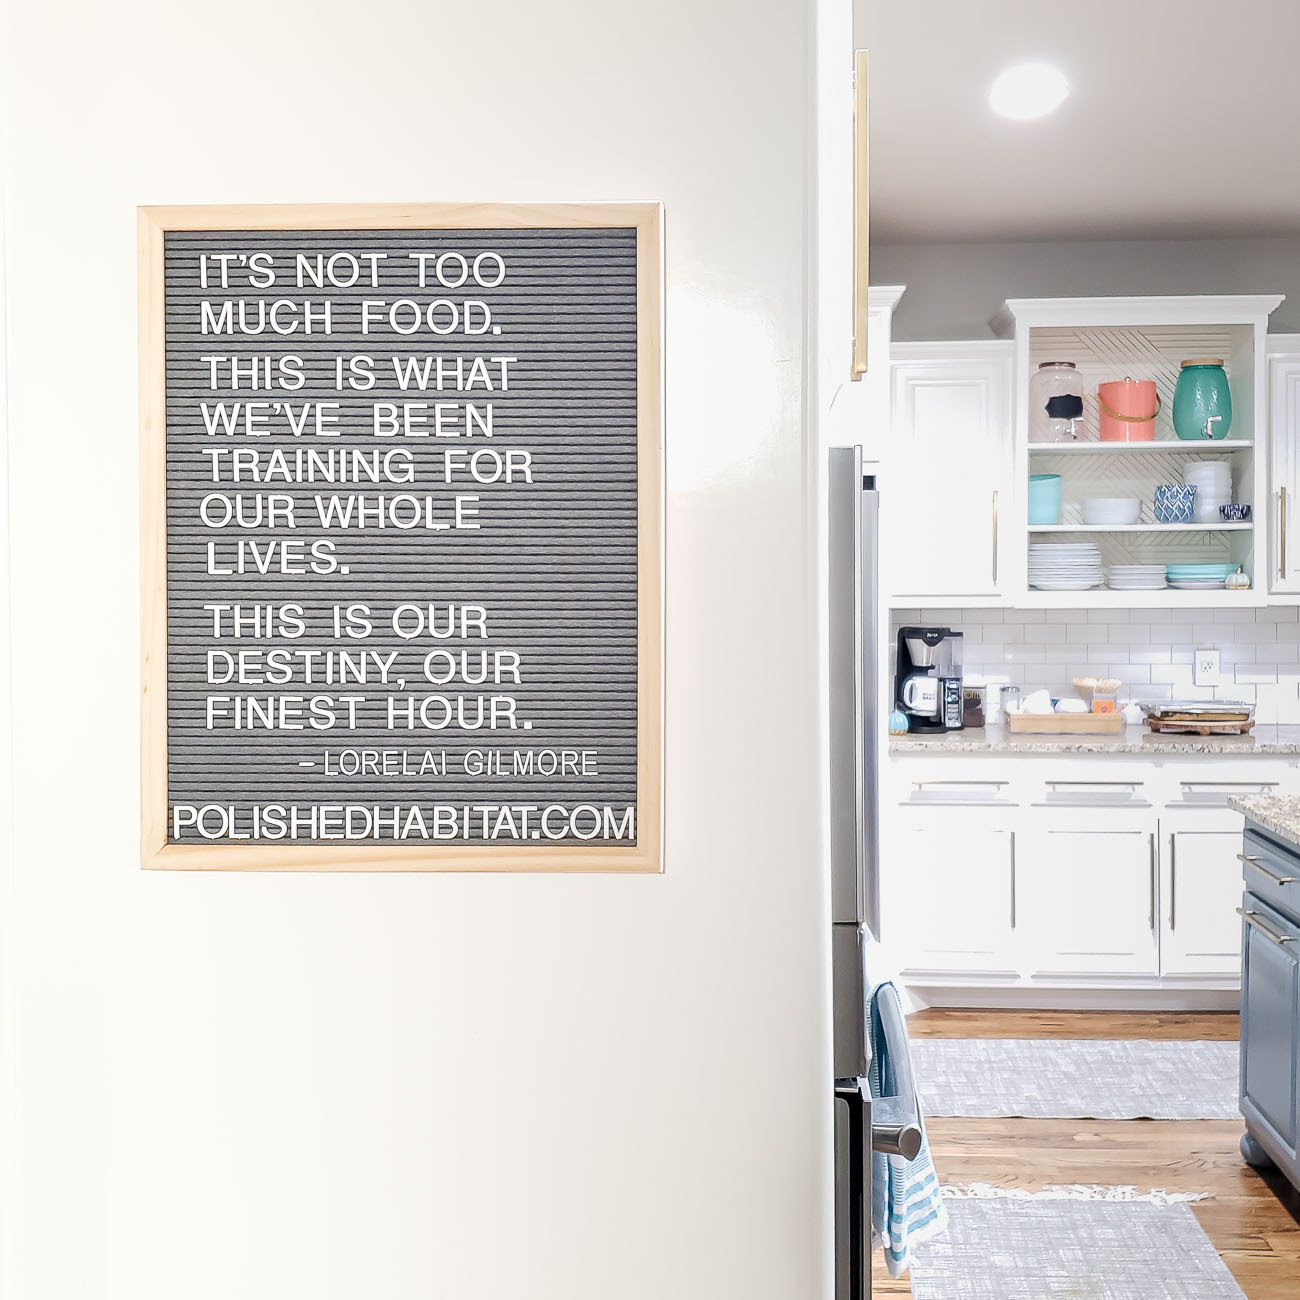 Thanksgiving Quotes Letter Board
 Thanksgiving Letter Board Ideas Polished Habitat